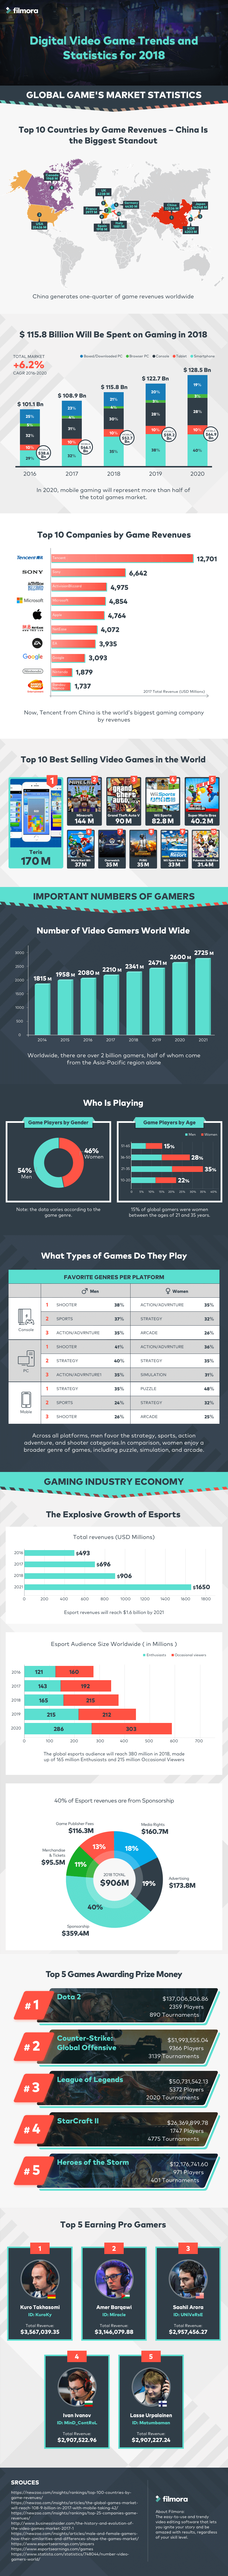 video game trends and stats